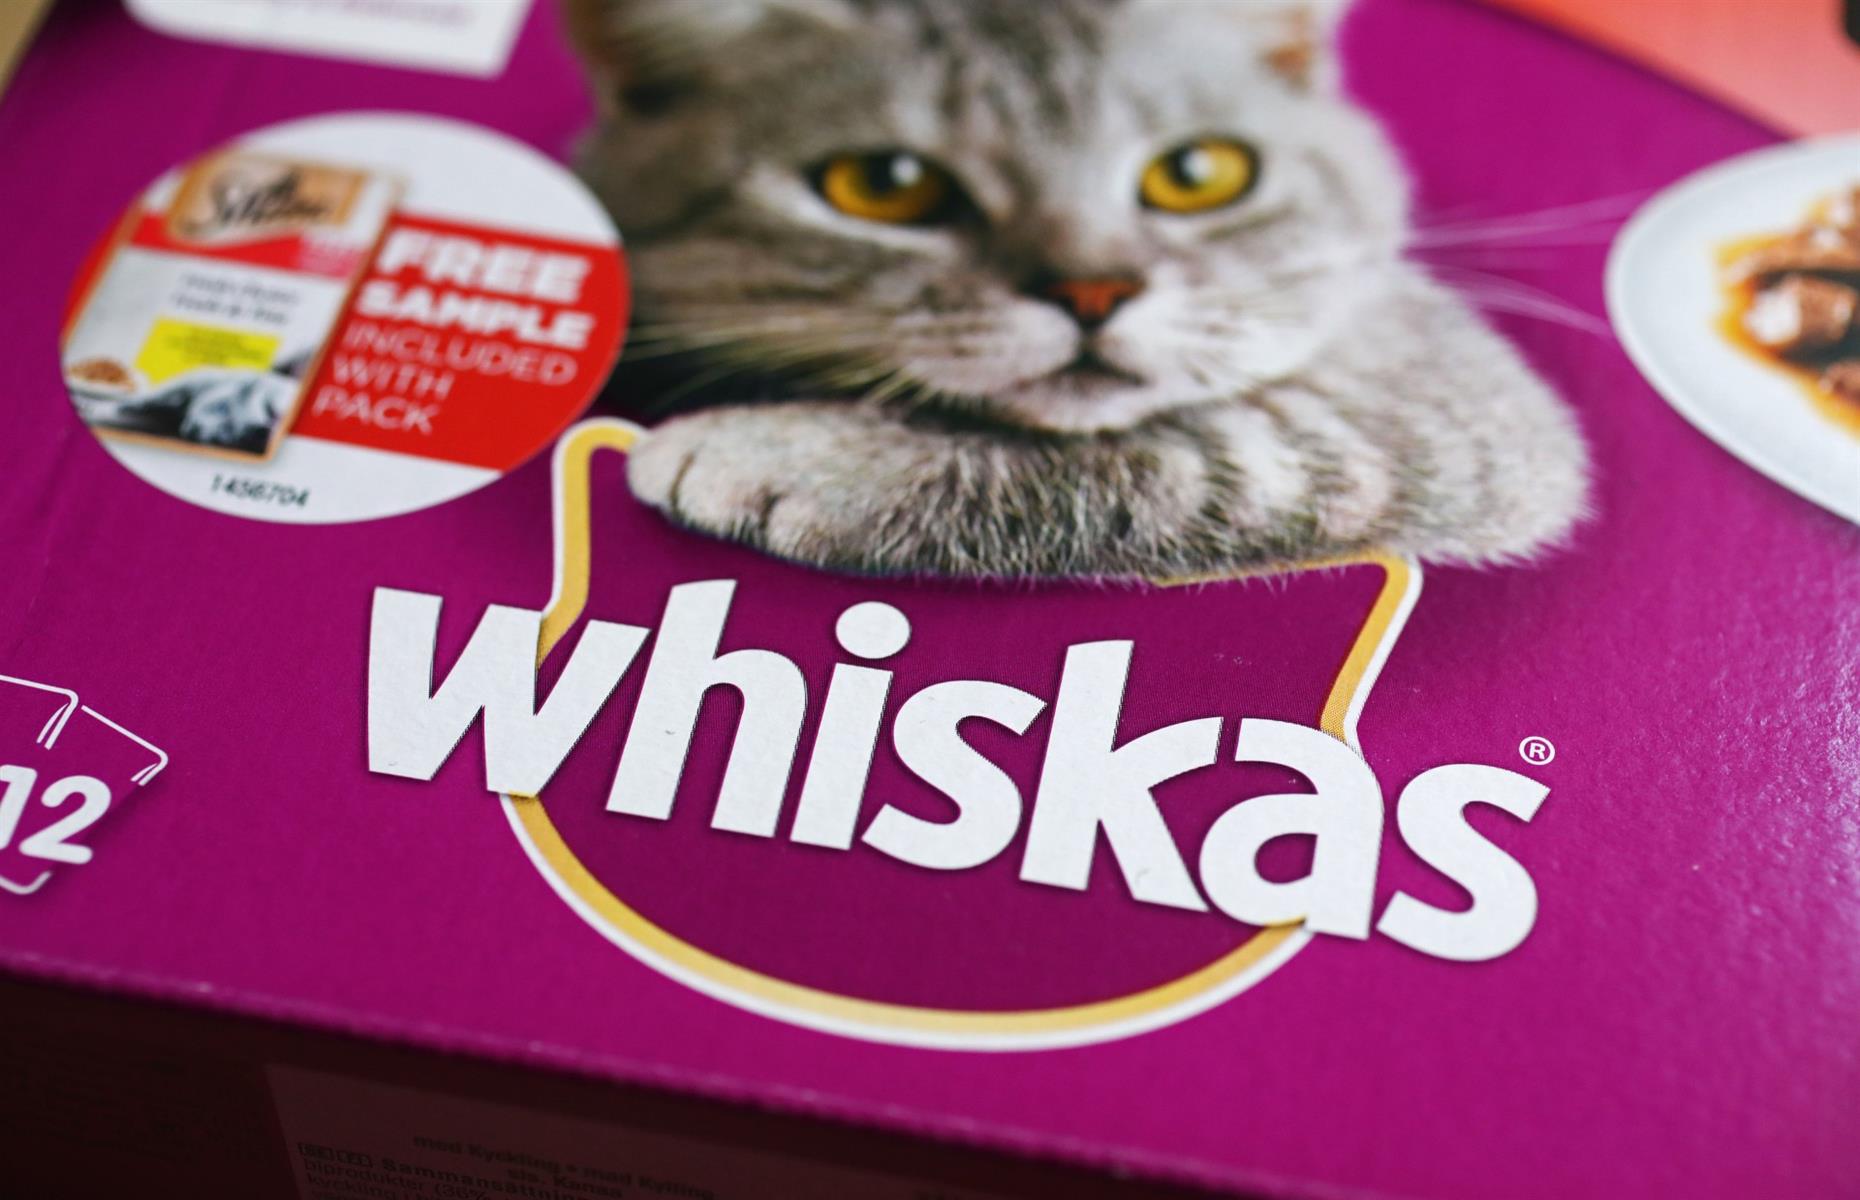 Whiskas: owned by Mars